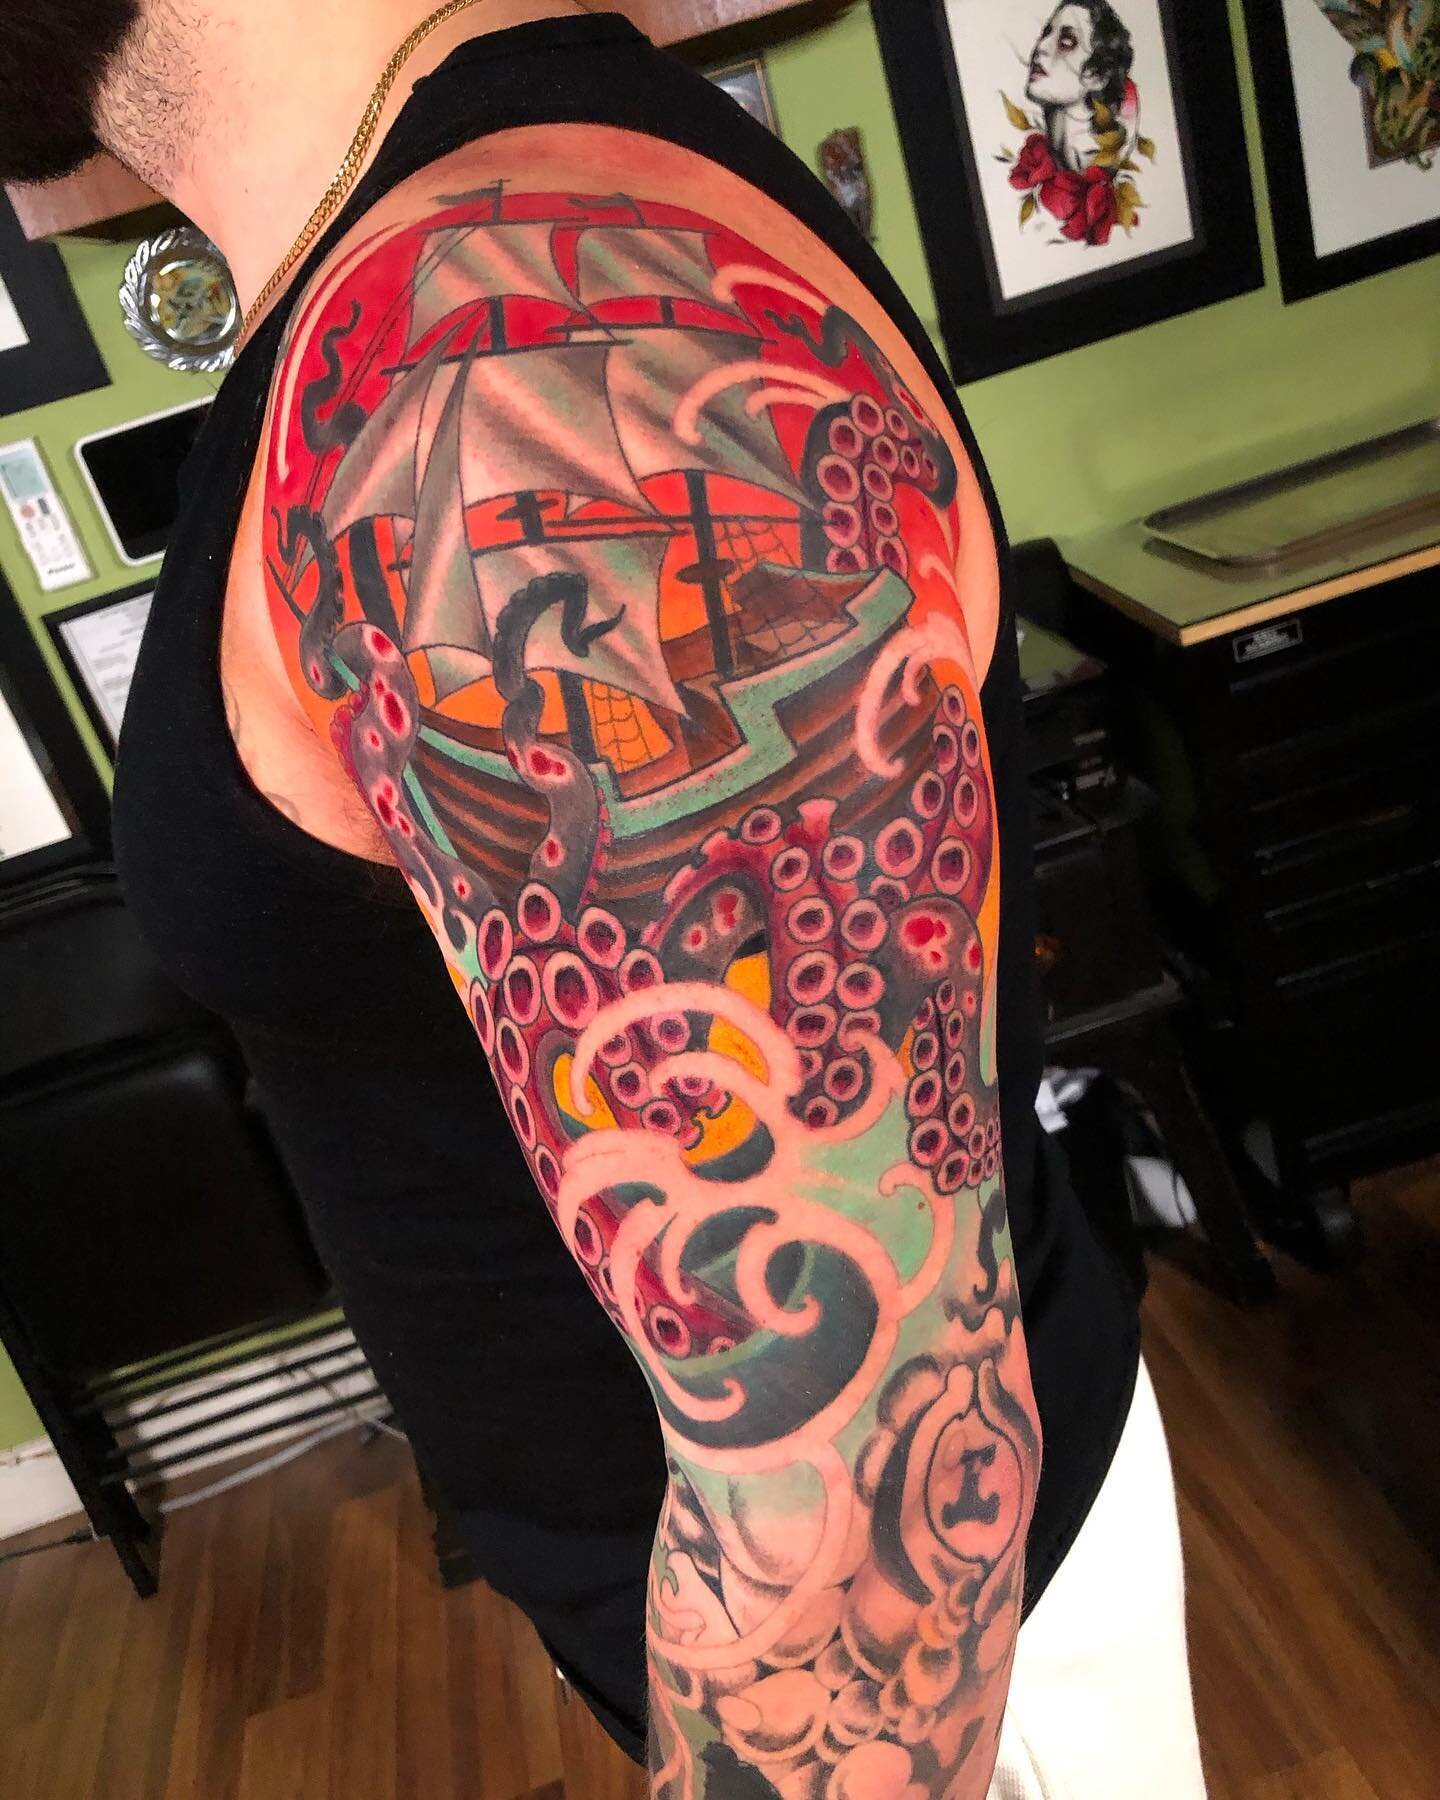 Here&rsquo;s a sneak peek at a sleeve in progress 👀 Really looking forward to finishing this arm up, thanks, Jose!
&bull;
To book an appointment, hit the link in my bio 🎉 or email me directly to t_burtz@yahoo.com
&bull;
&bull;
&bull;
&bull;
#missin